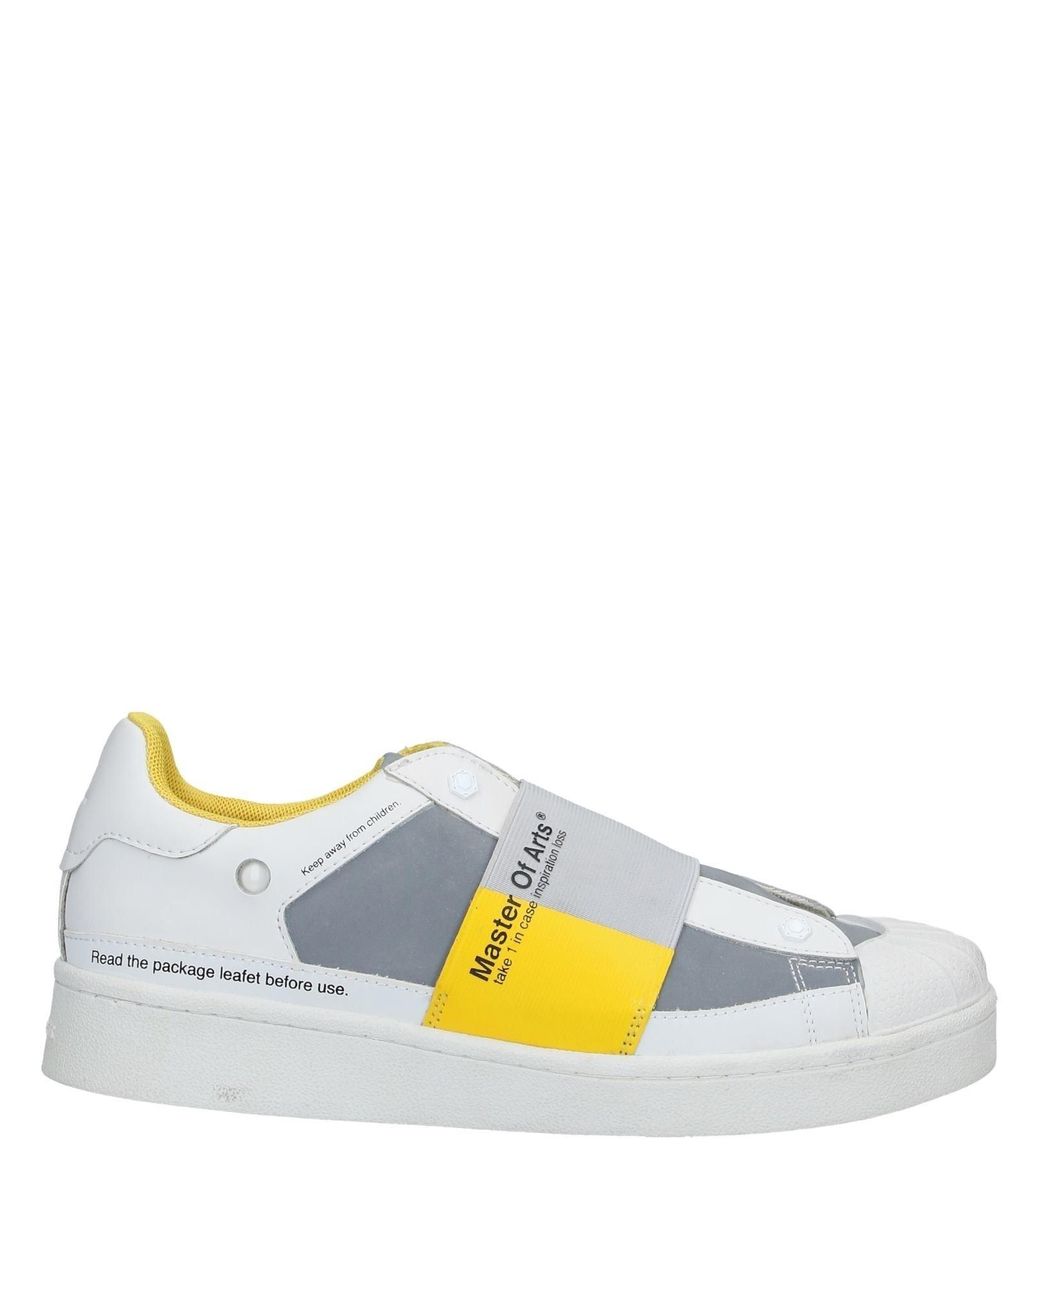 MOA Low-tops & Sneakers in White for Men - Lyst